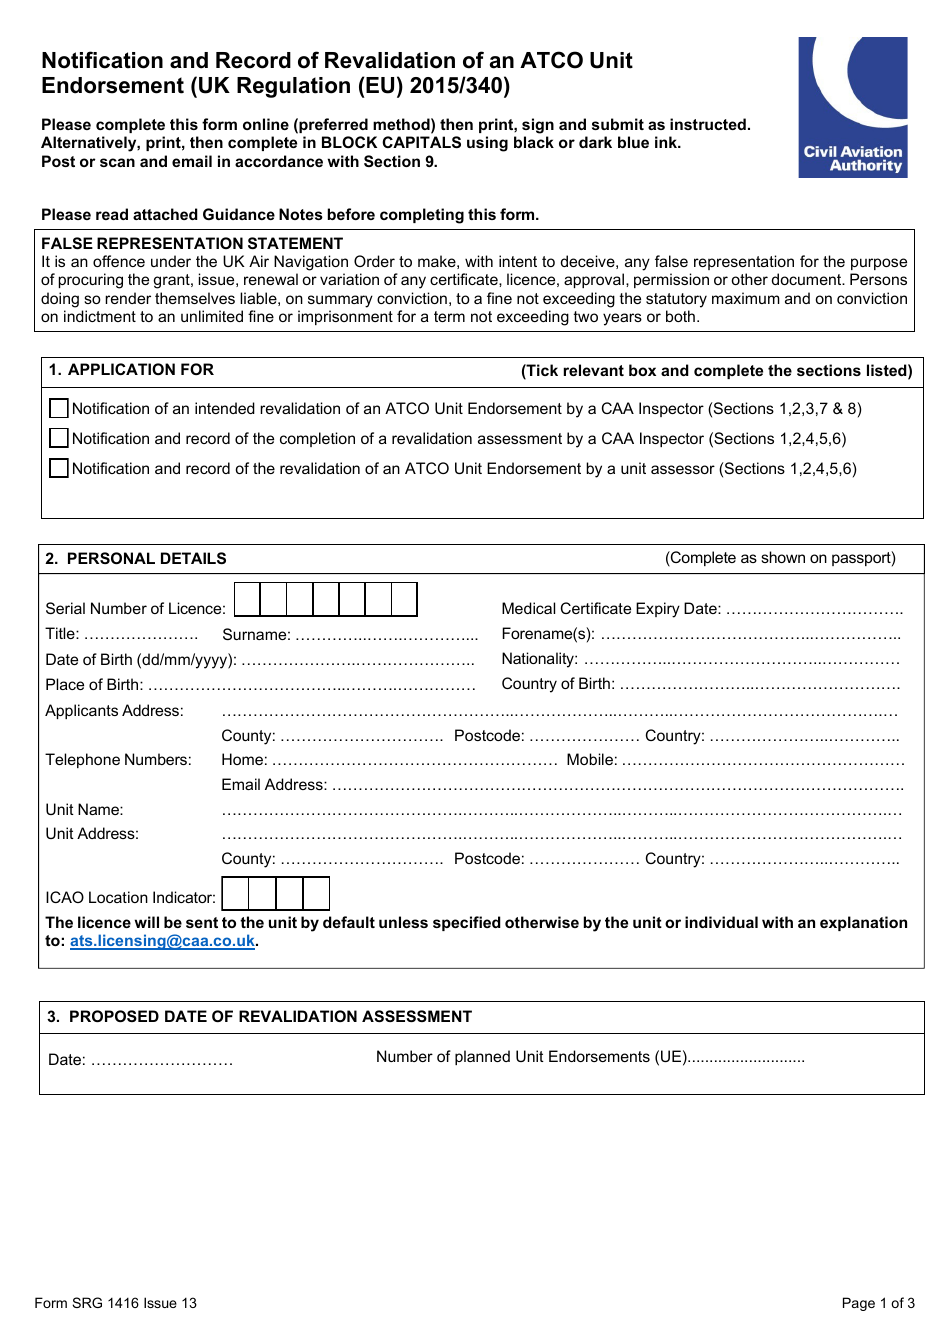 Form SRG1416 Notification and Record of Revalidation of an Atco Unit Endorsement (UK Regulation (Eu) 2015 / 340) - United Kingdom, Page 1